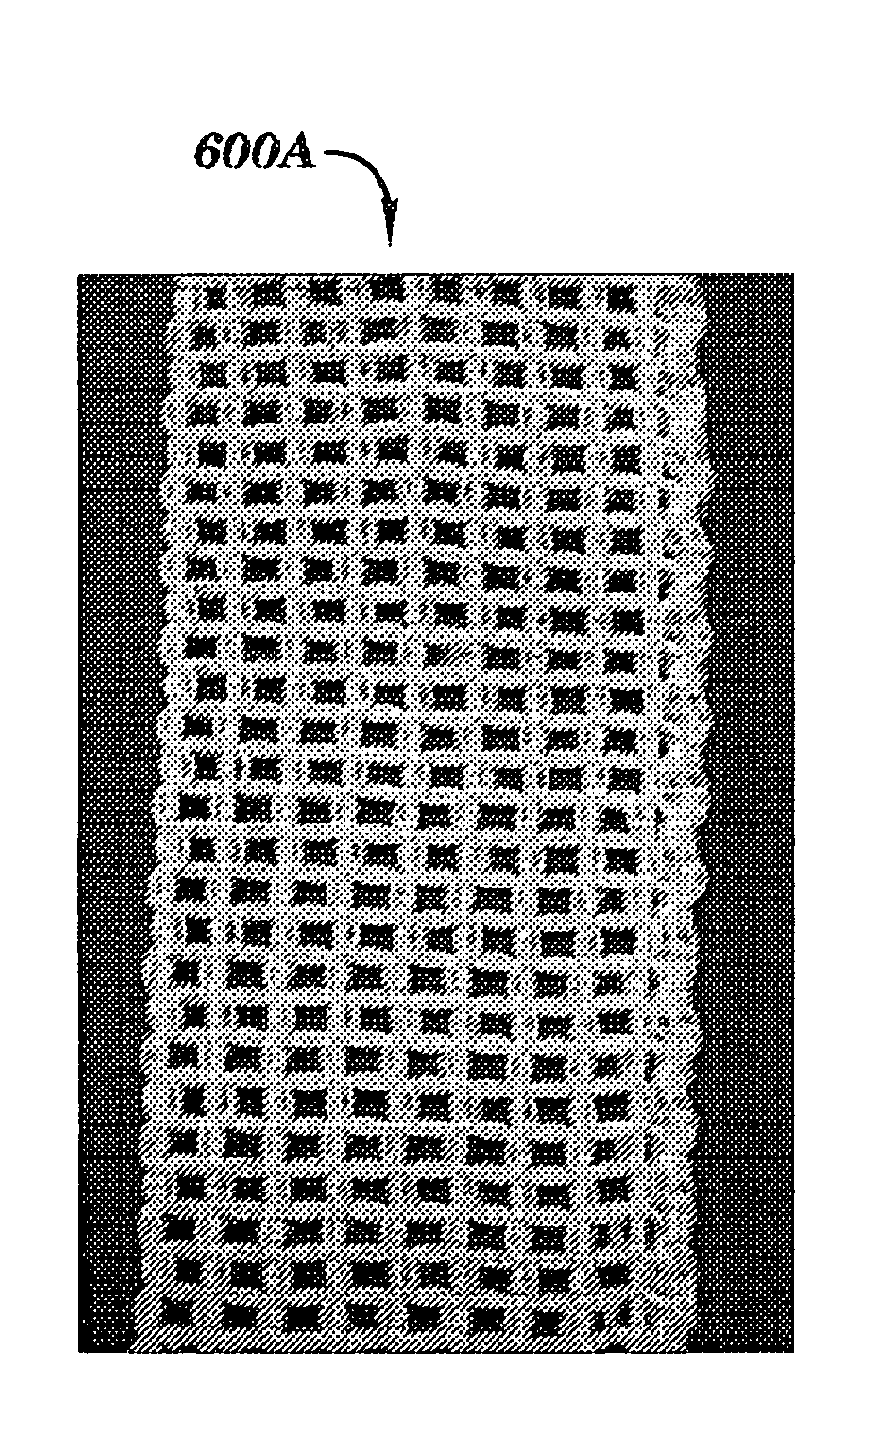 Method for making a knitted mesh